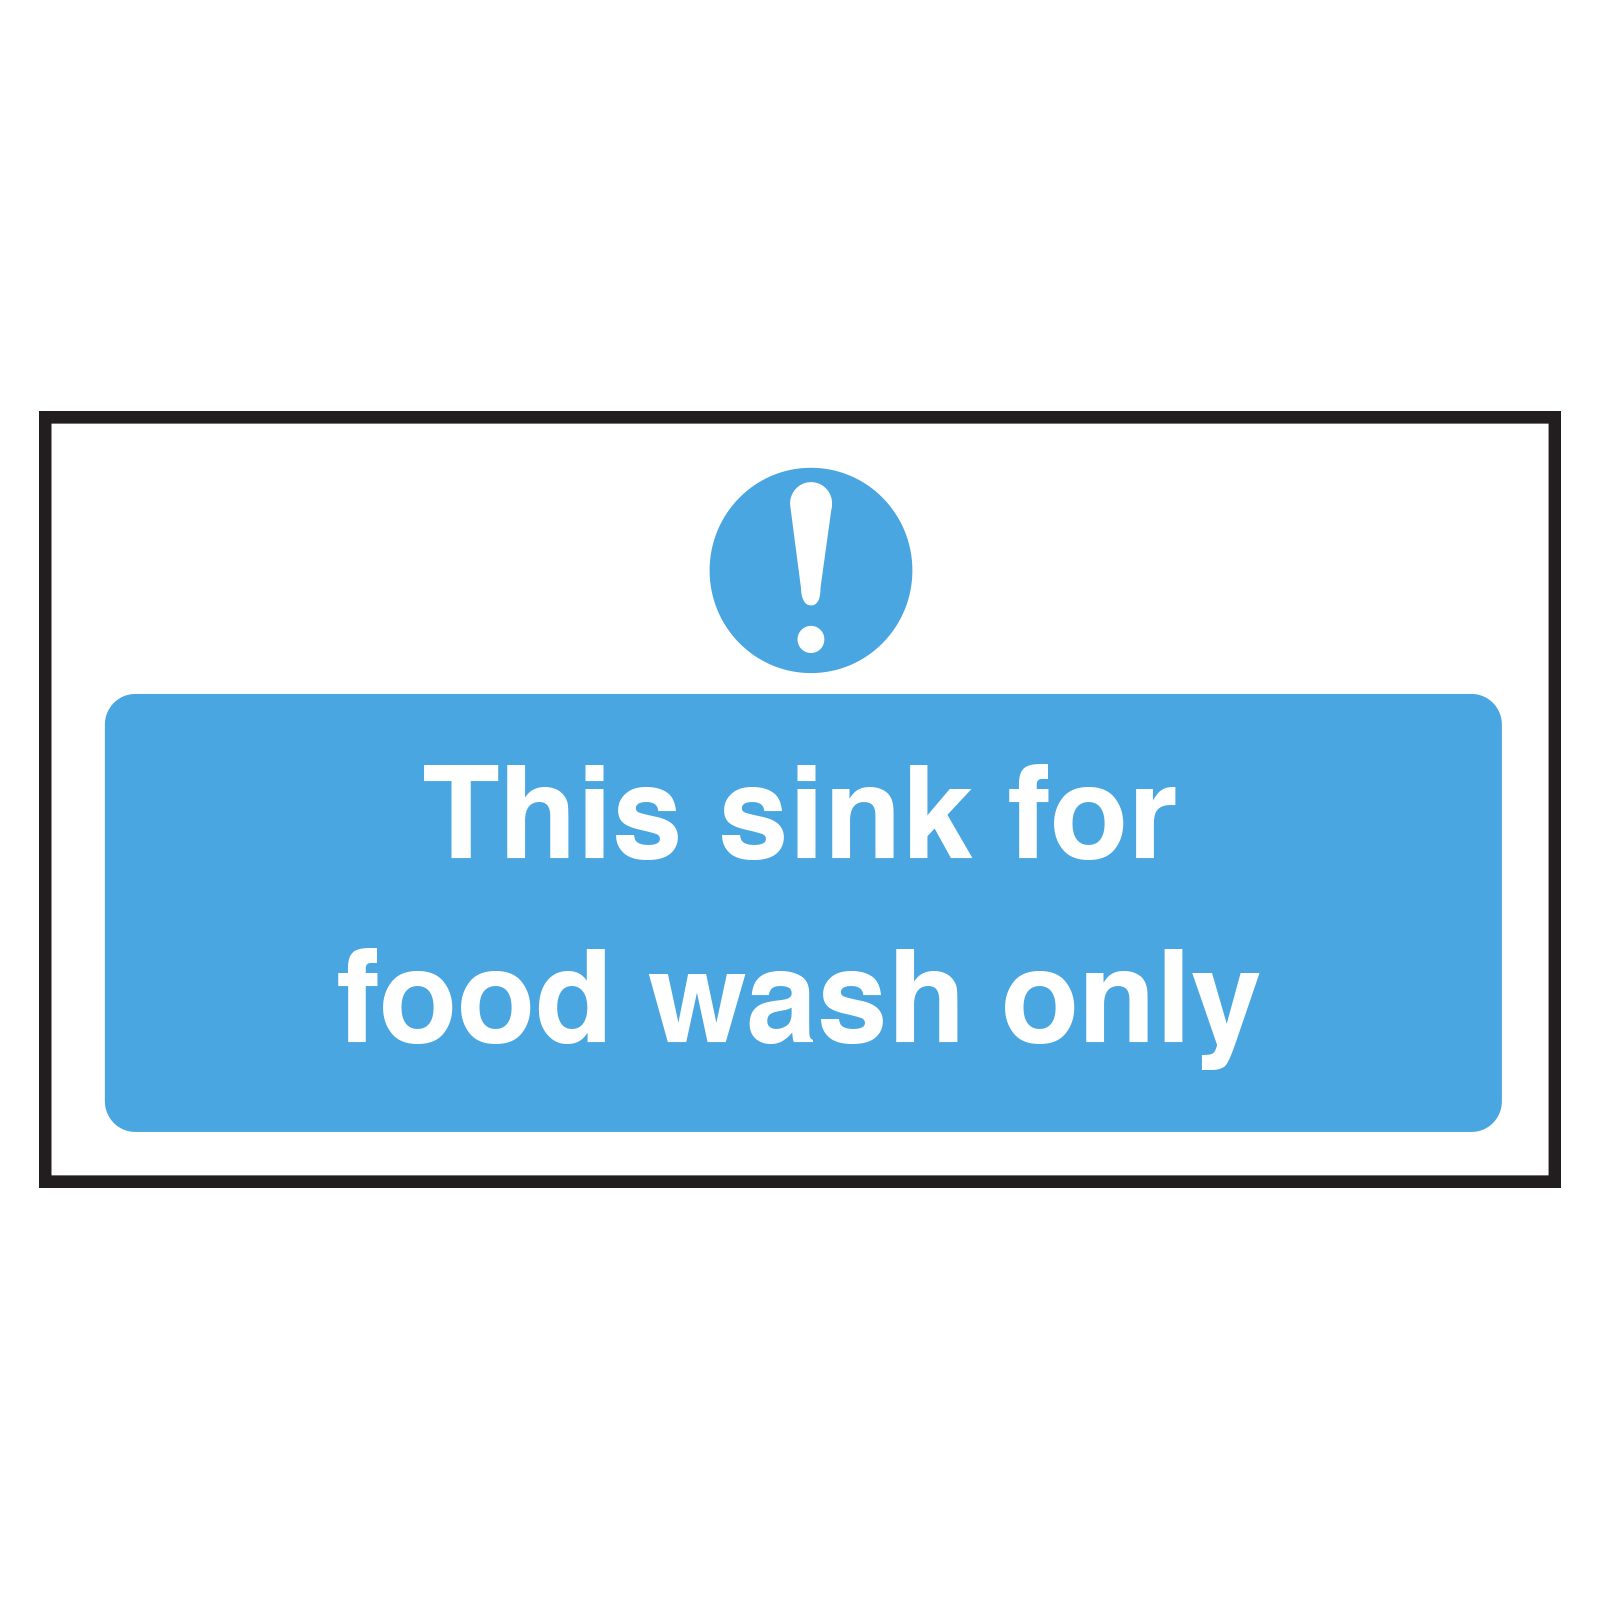 Sink for Food Wash Only Sign